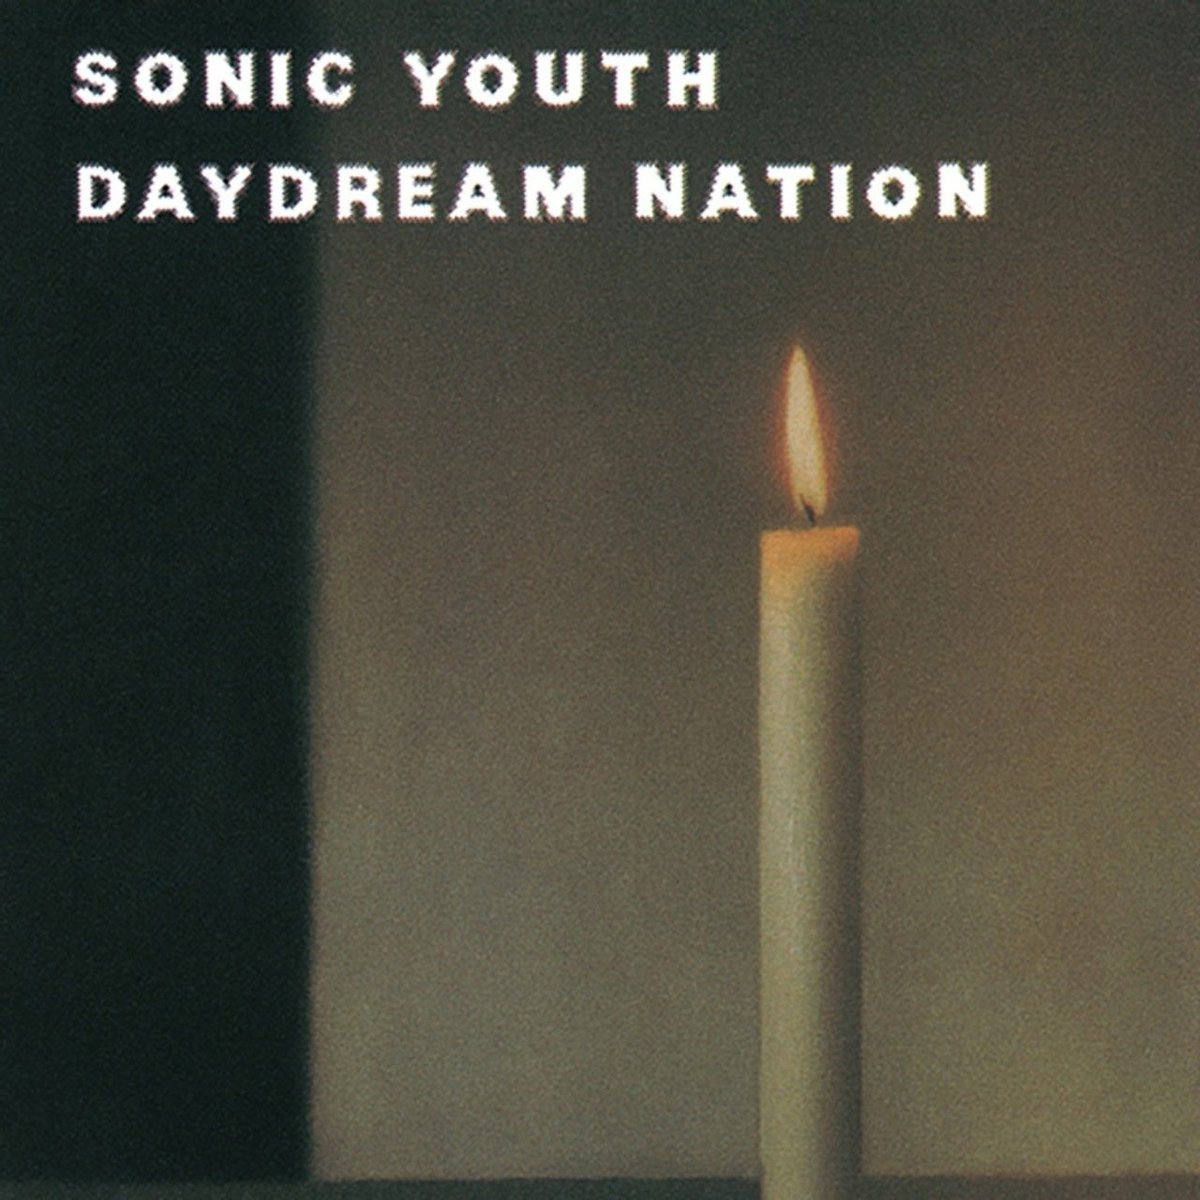 #NowPlaying “Teen Age Riot“ from “Daydream Nation“ / Sonic Youth
#SonicYouth
#DaydreamNation
#TeenAgeRiot